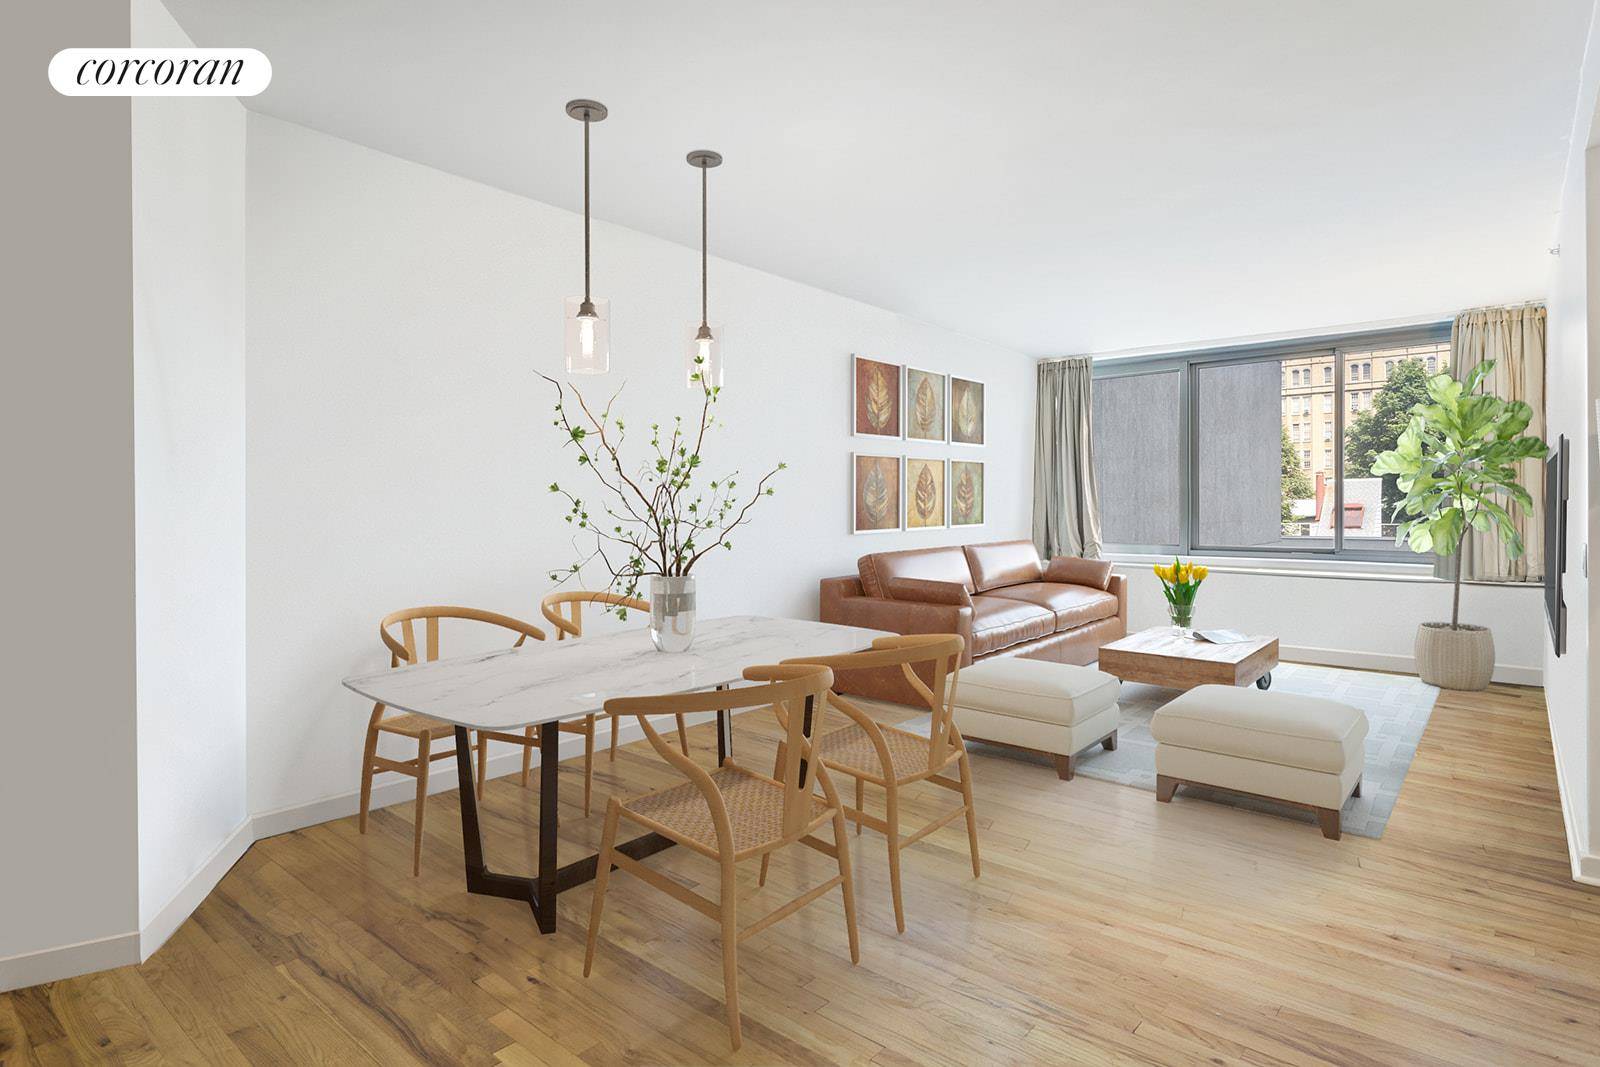 Rarely available, this 1, 435 square foot stylish 3 bedroom, 2 bathroom Fort Greene condo unit in a full service elevator building offers room to breathe.